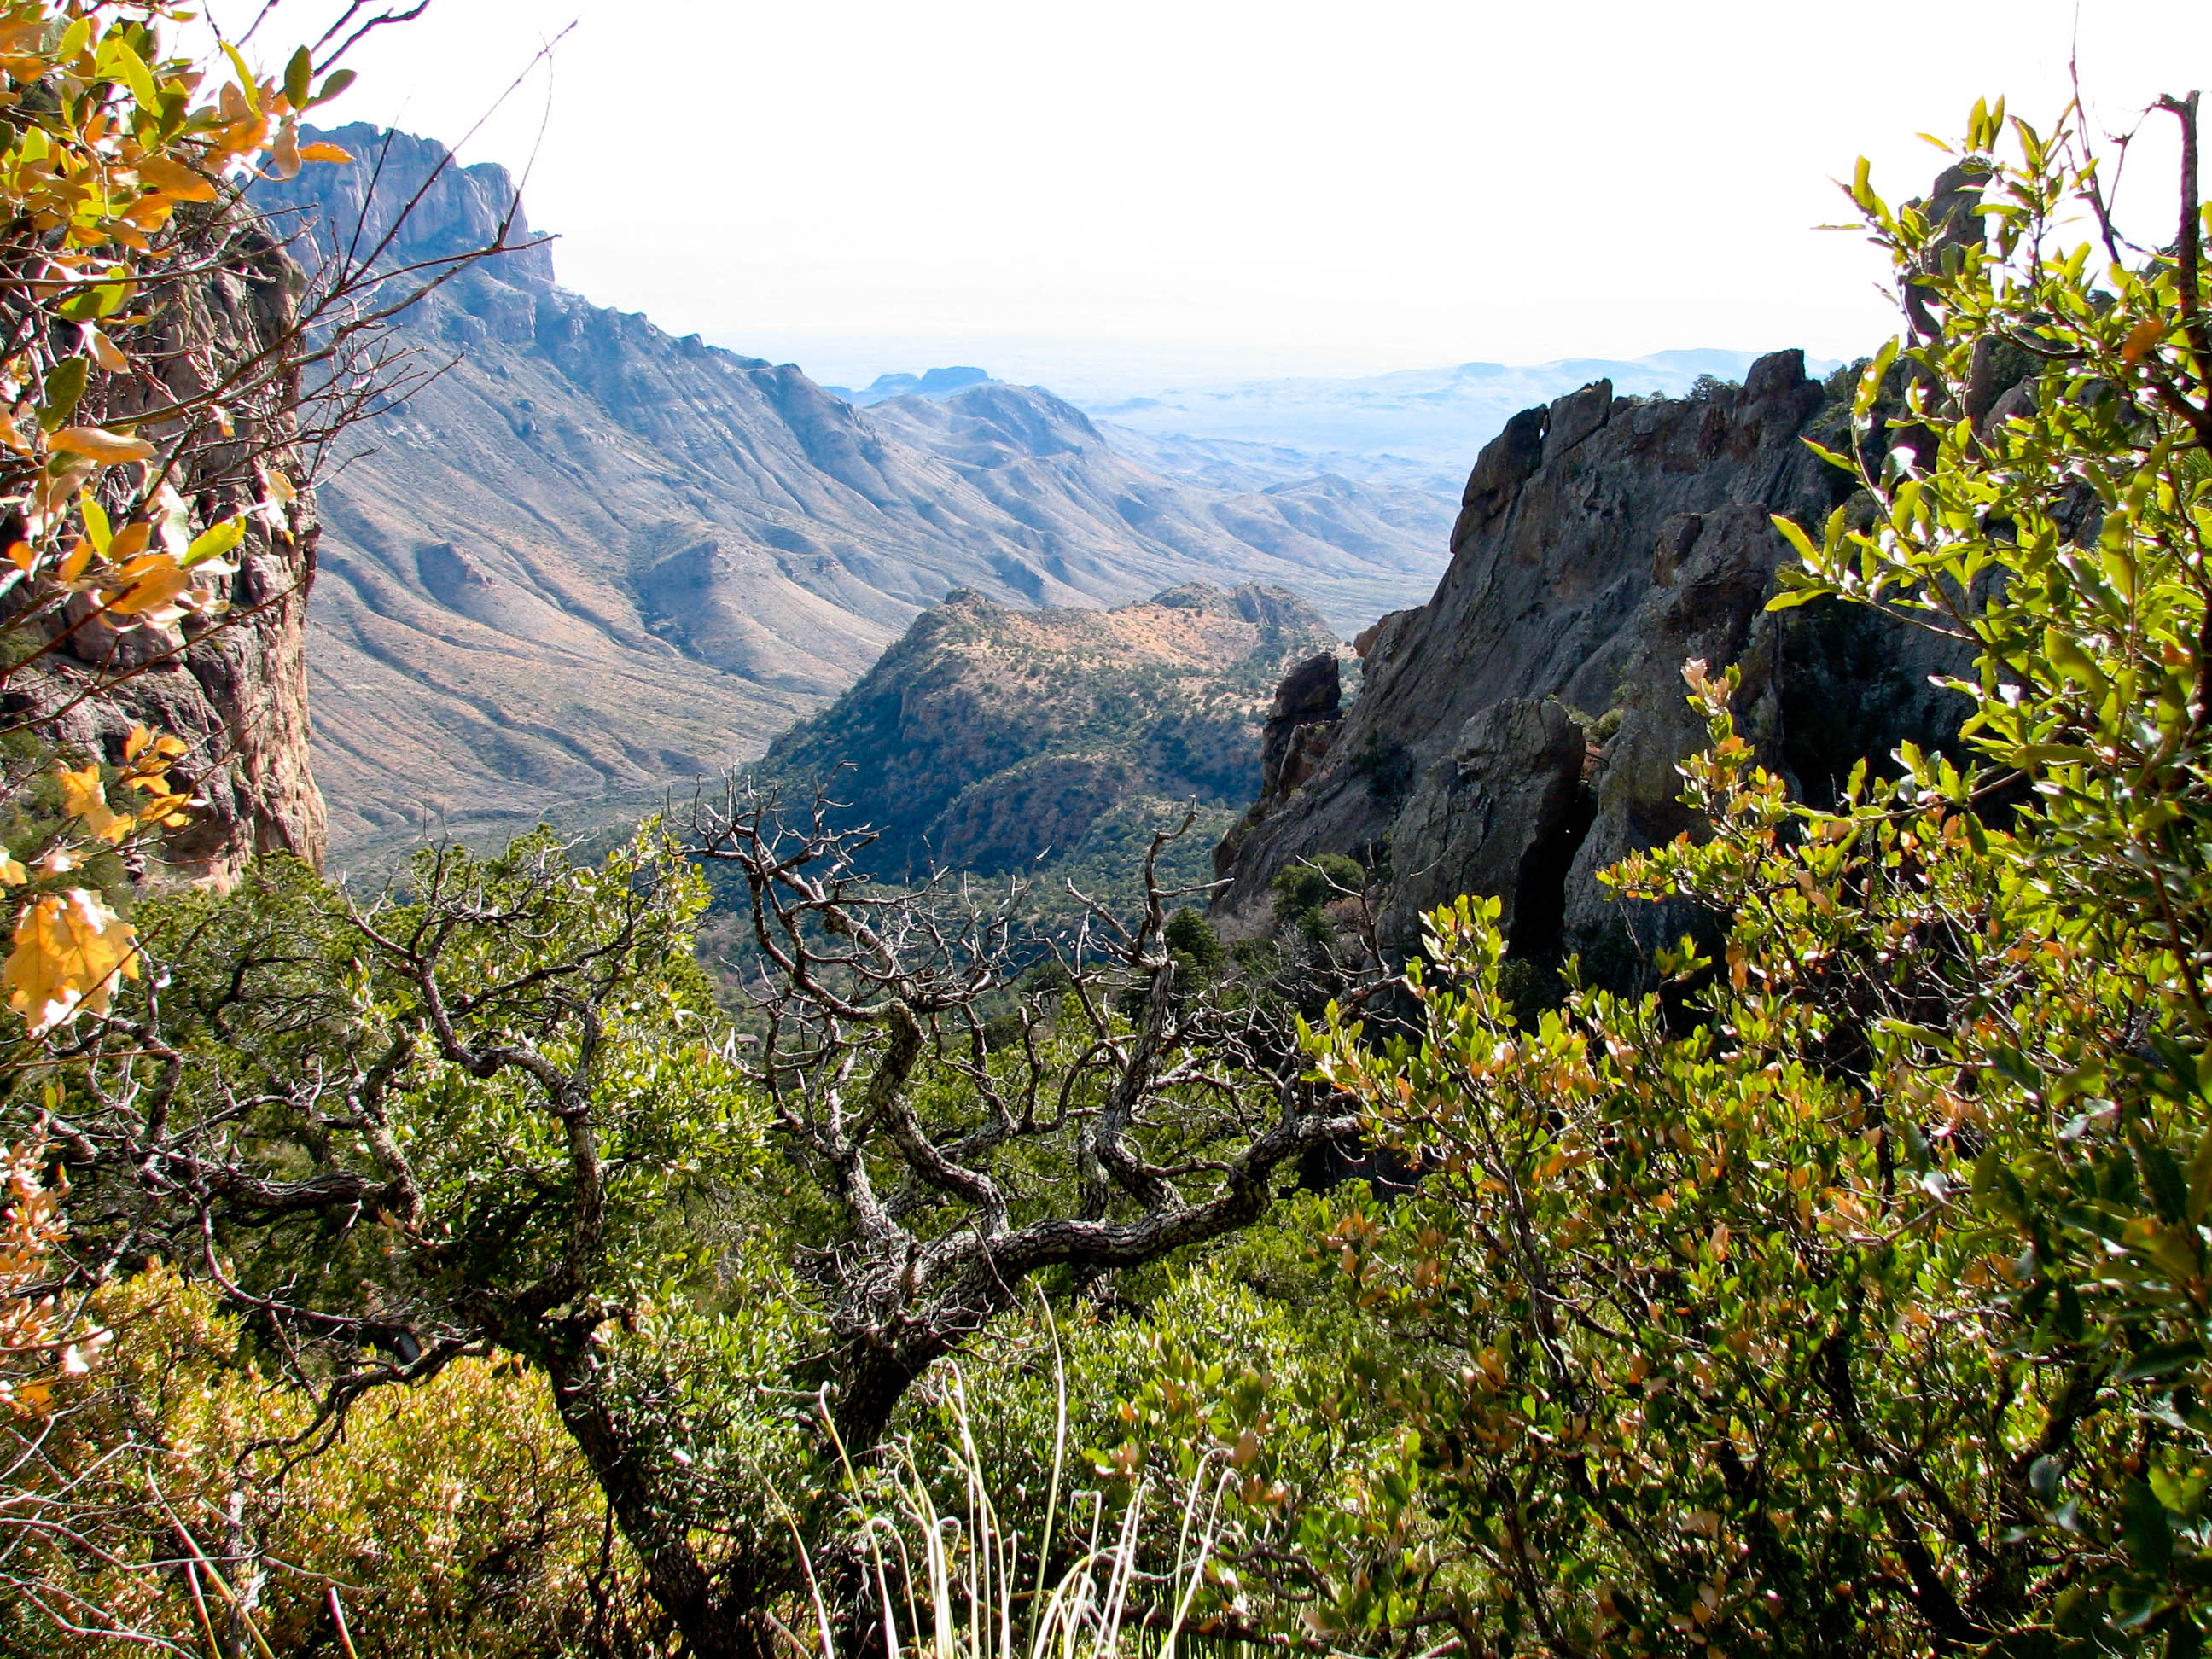 View from Boot Canyon at Big Bend National Park